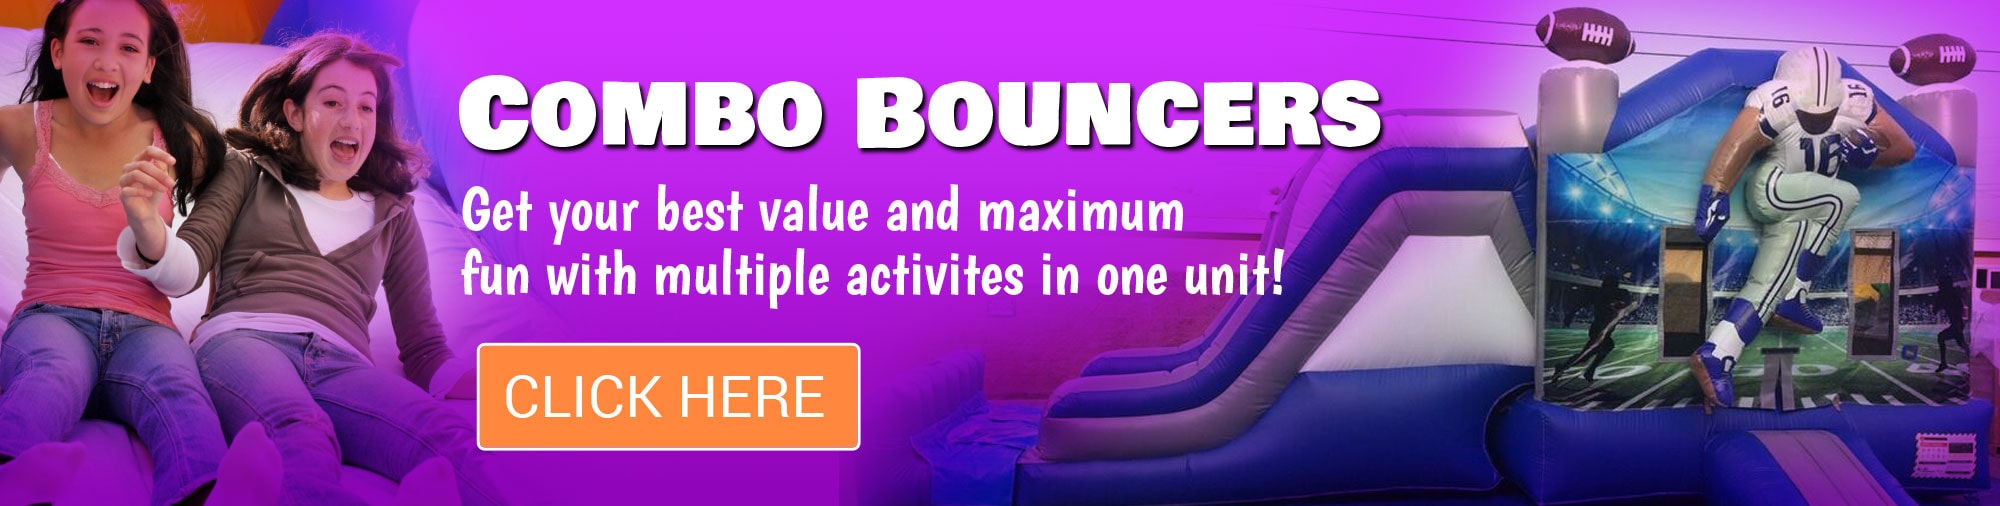 bounce house jump houses for birthday party rental